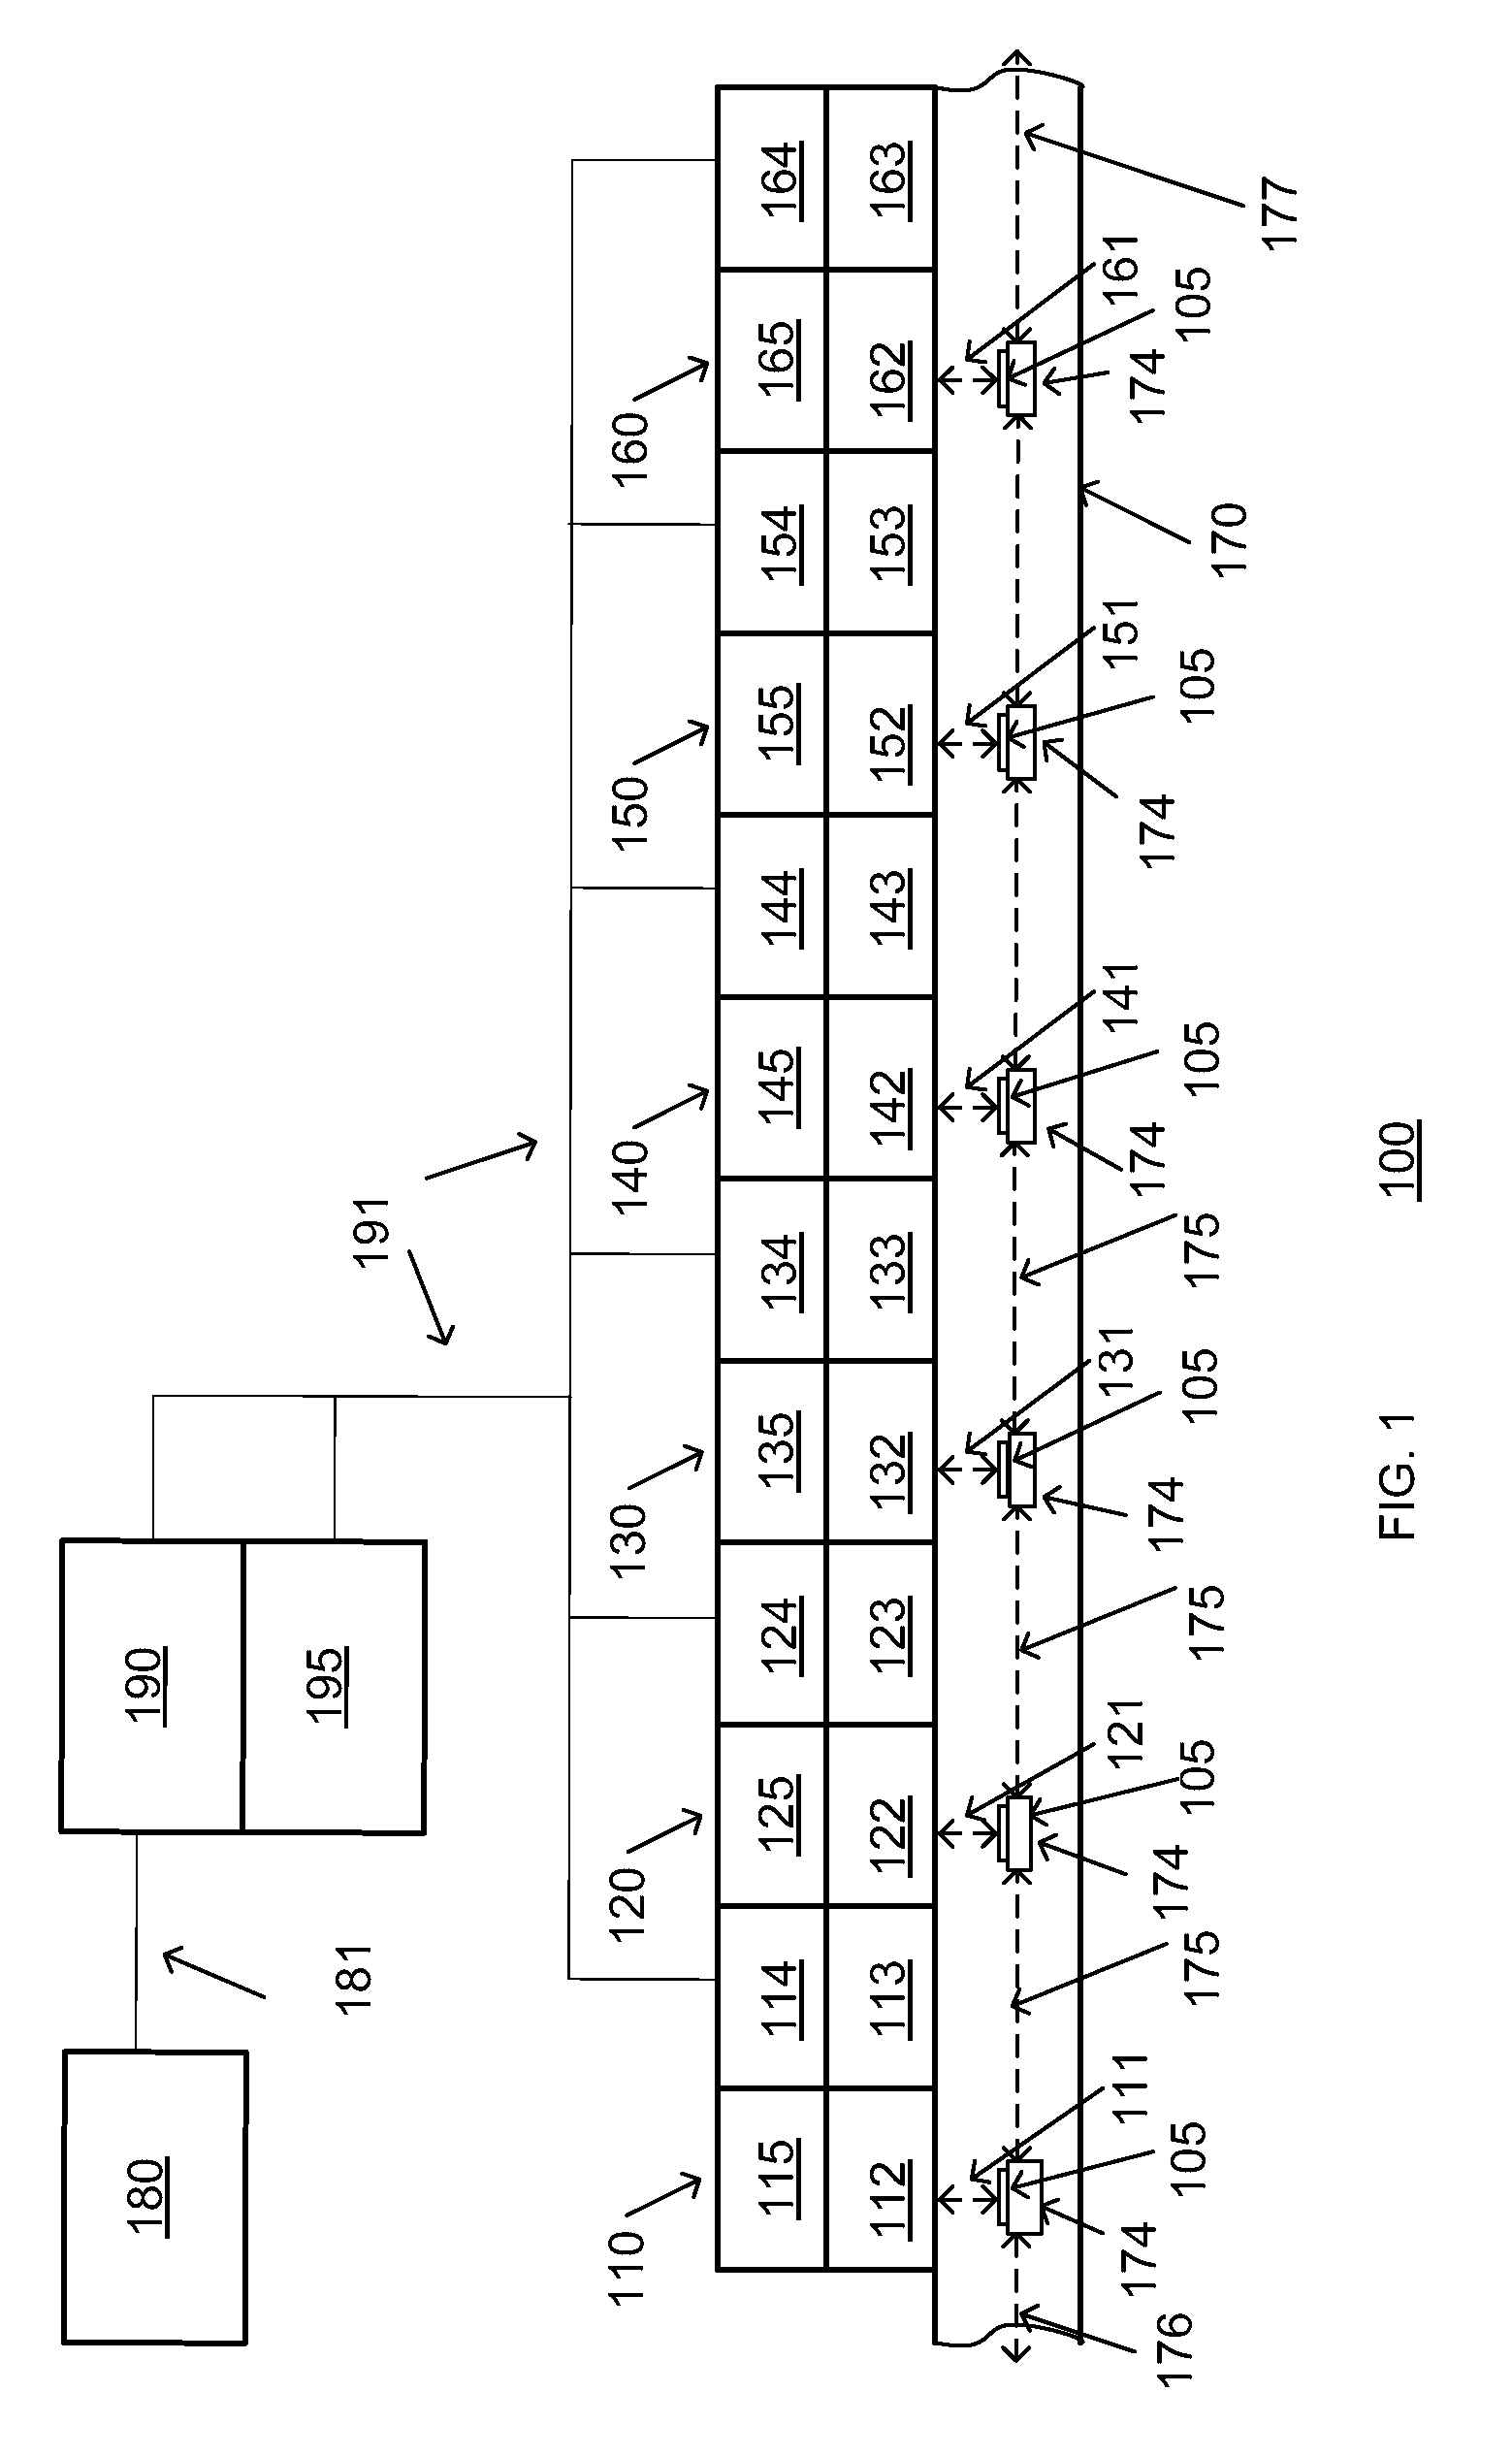 Apparatus and Method for Improving Photoresist Properties